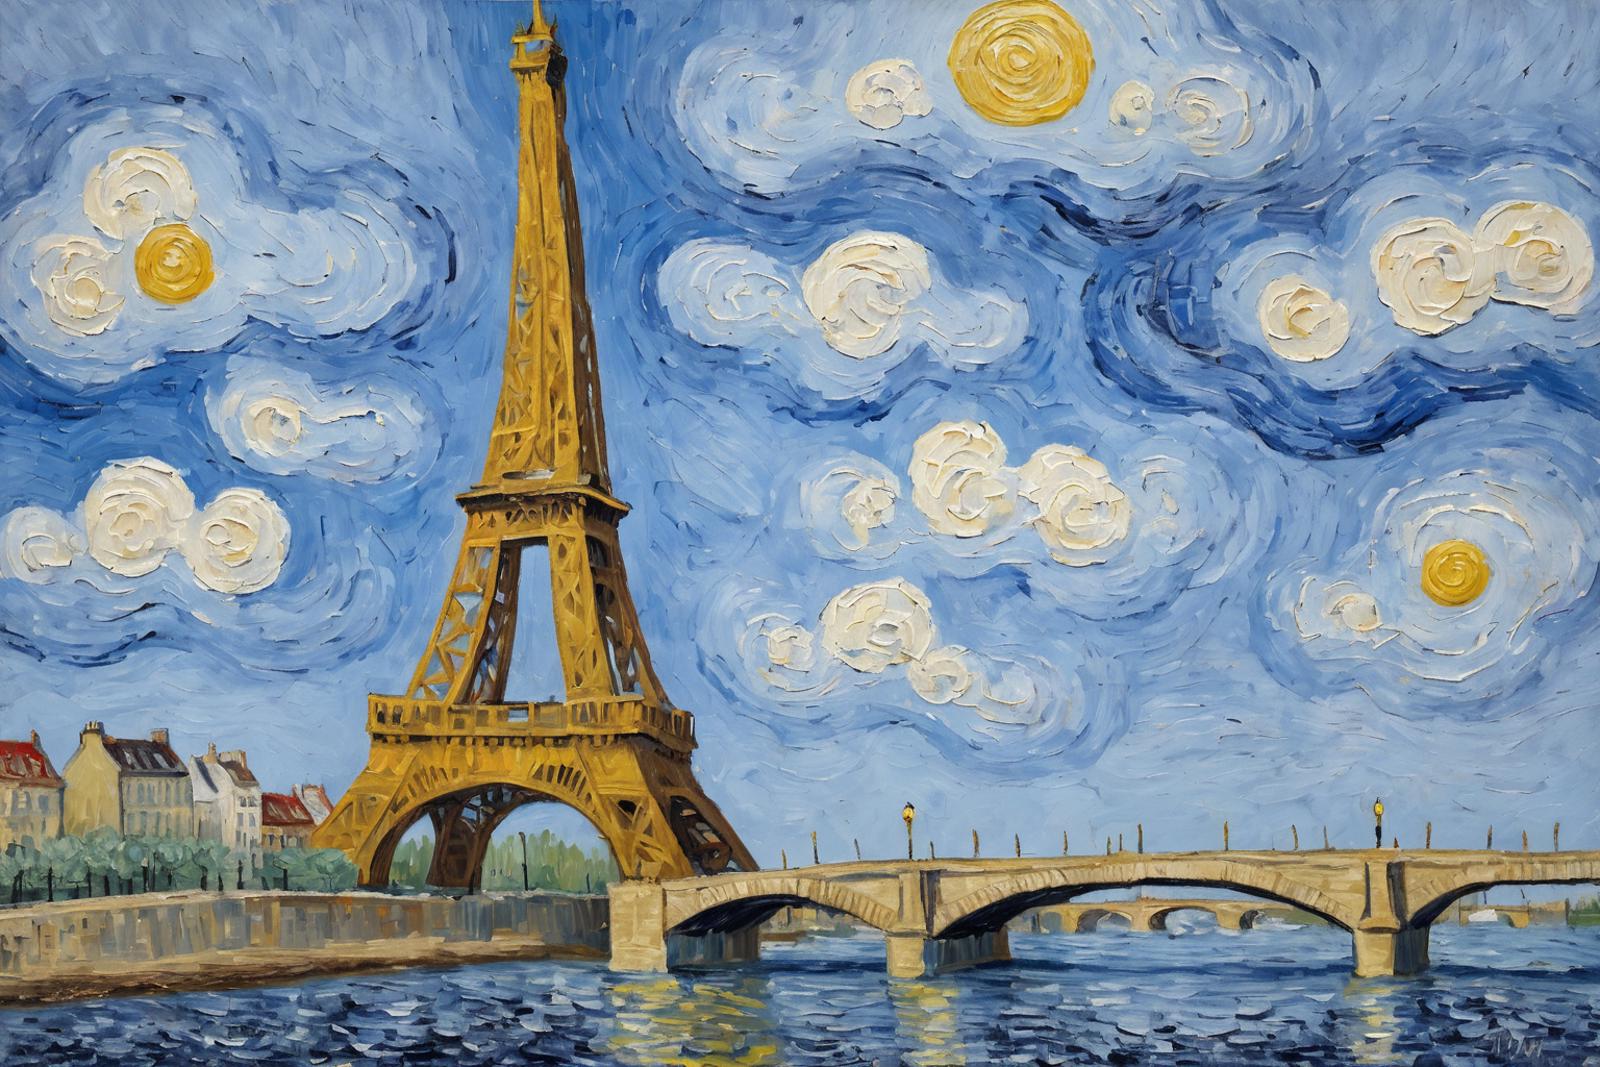 A painting of the Eiffel Tower with a bridge and clouds in the background.